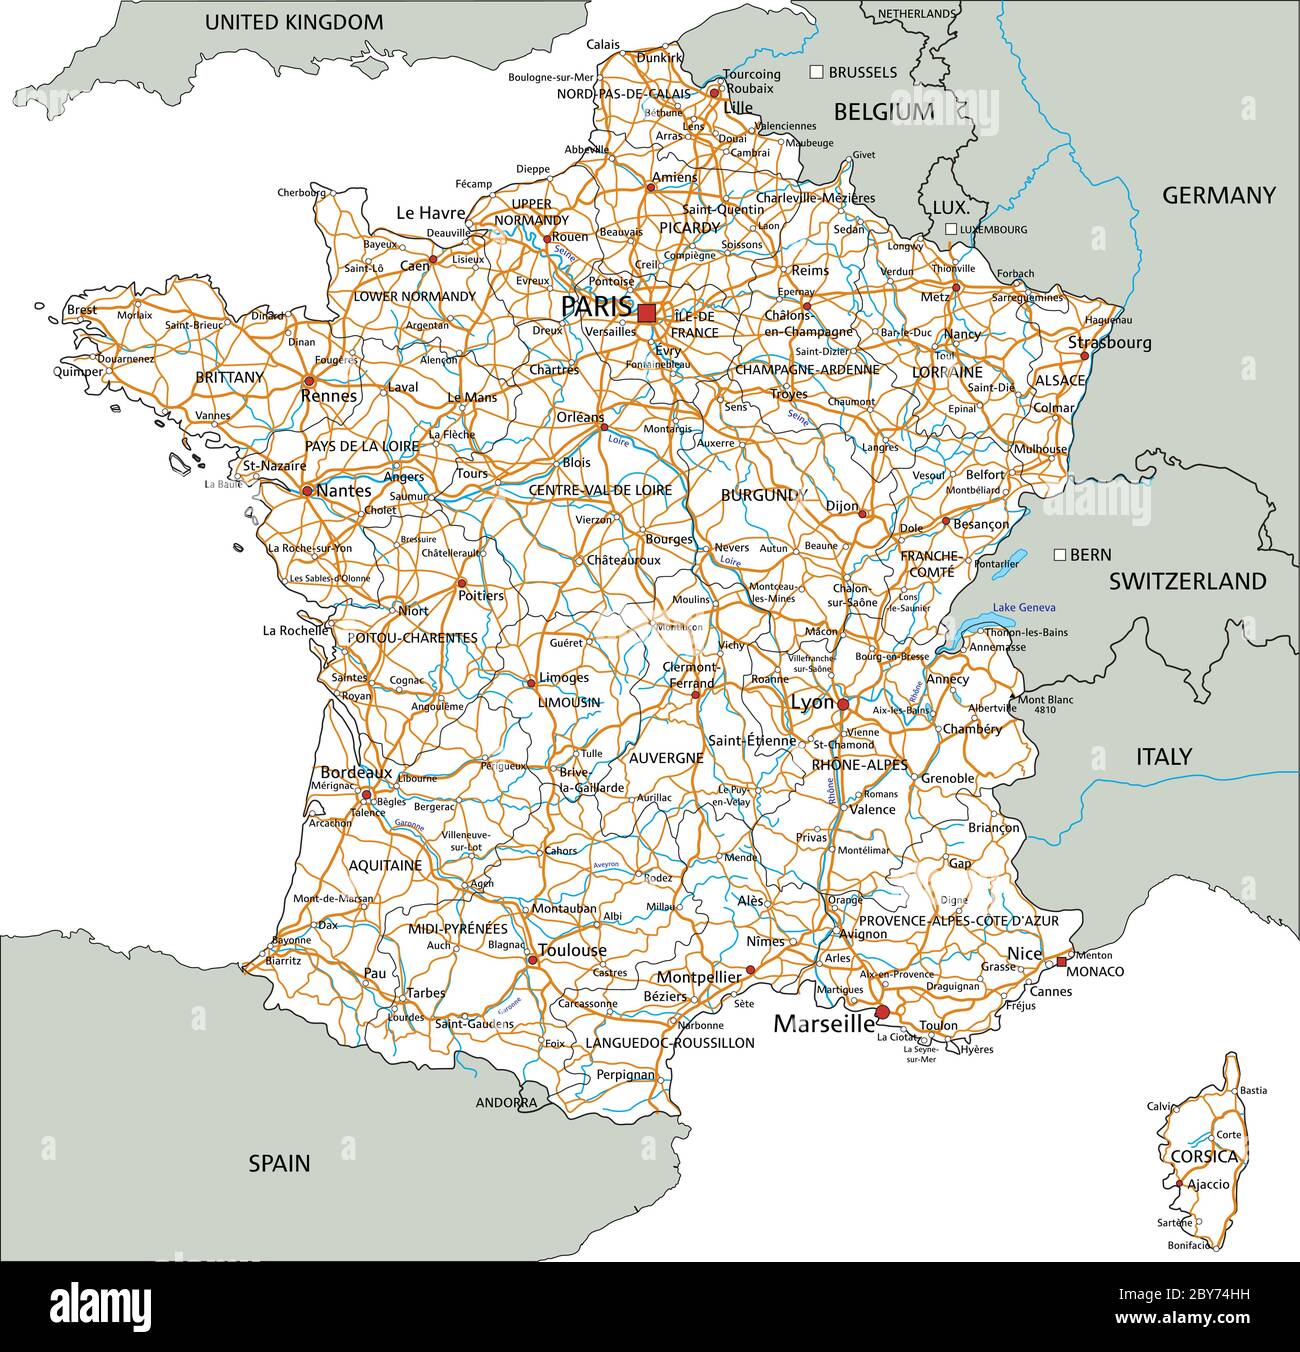 Detailed Road Map Of France